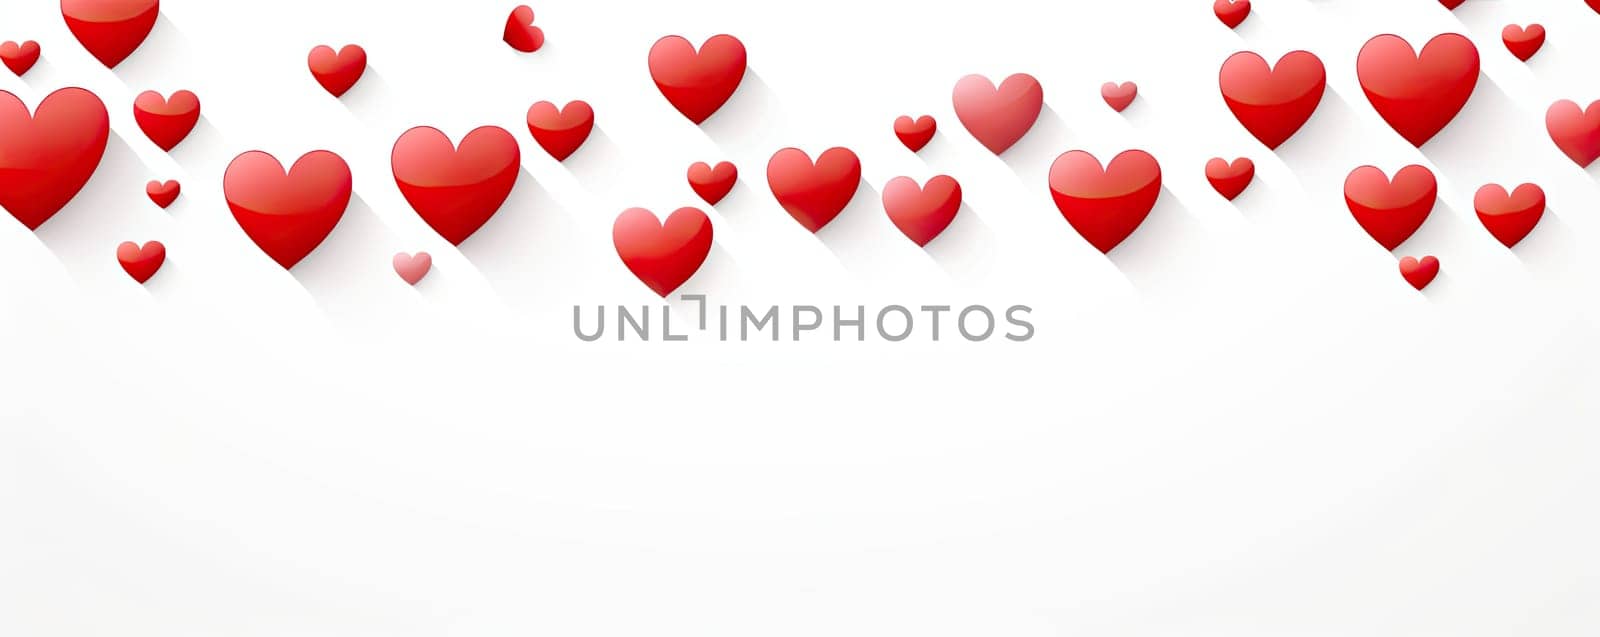 A romantic banner with many red and pink hearts on a fresh white background is a great decoration for Valentine's Day, filling the space with warmth and tenderness.